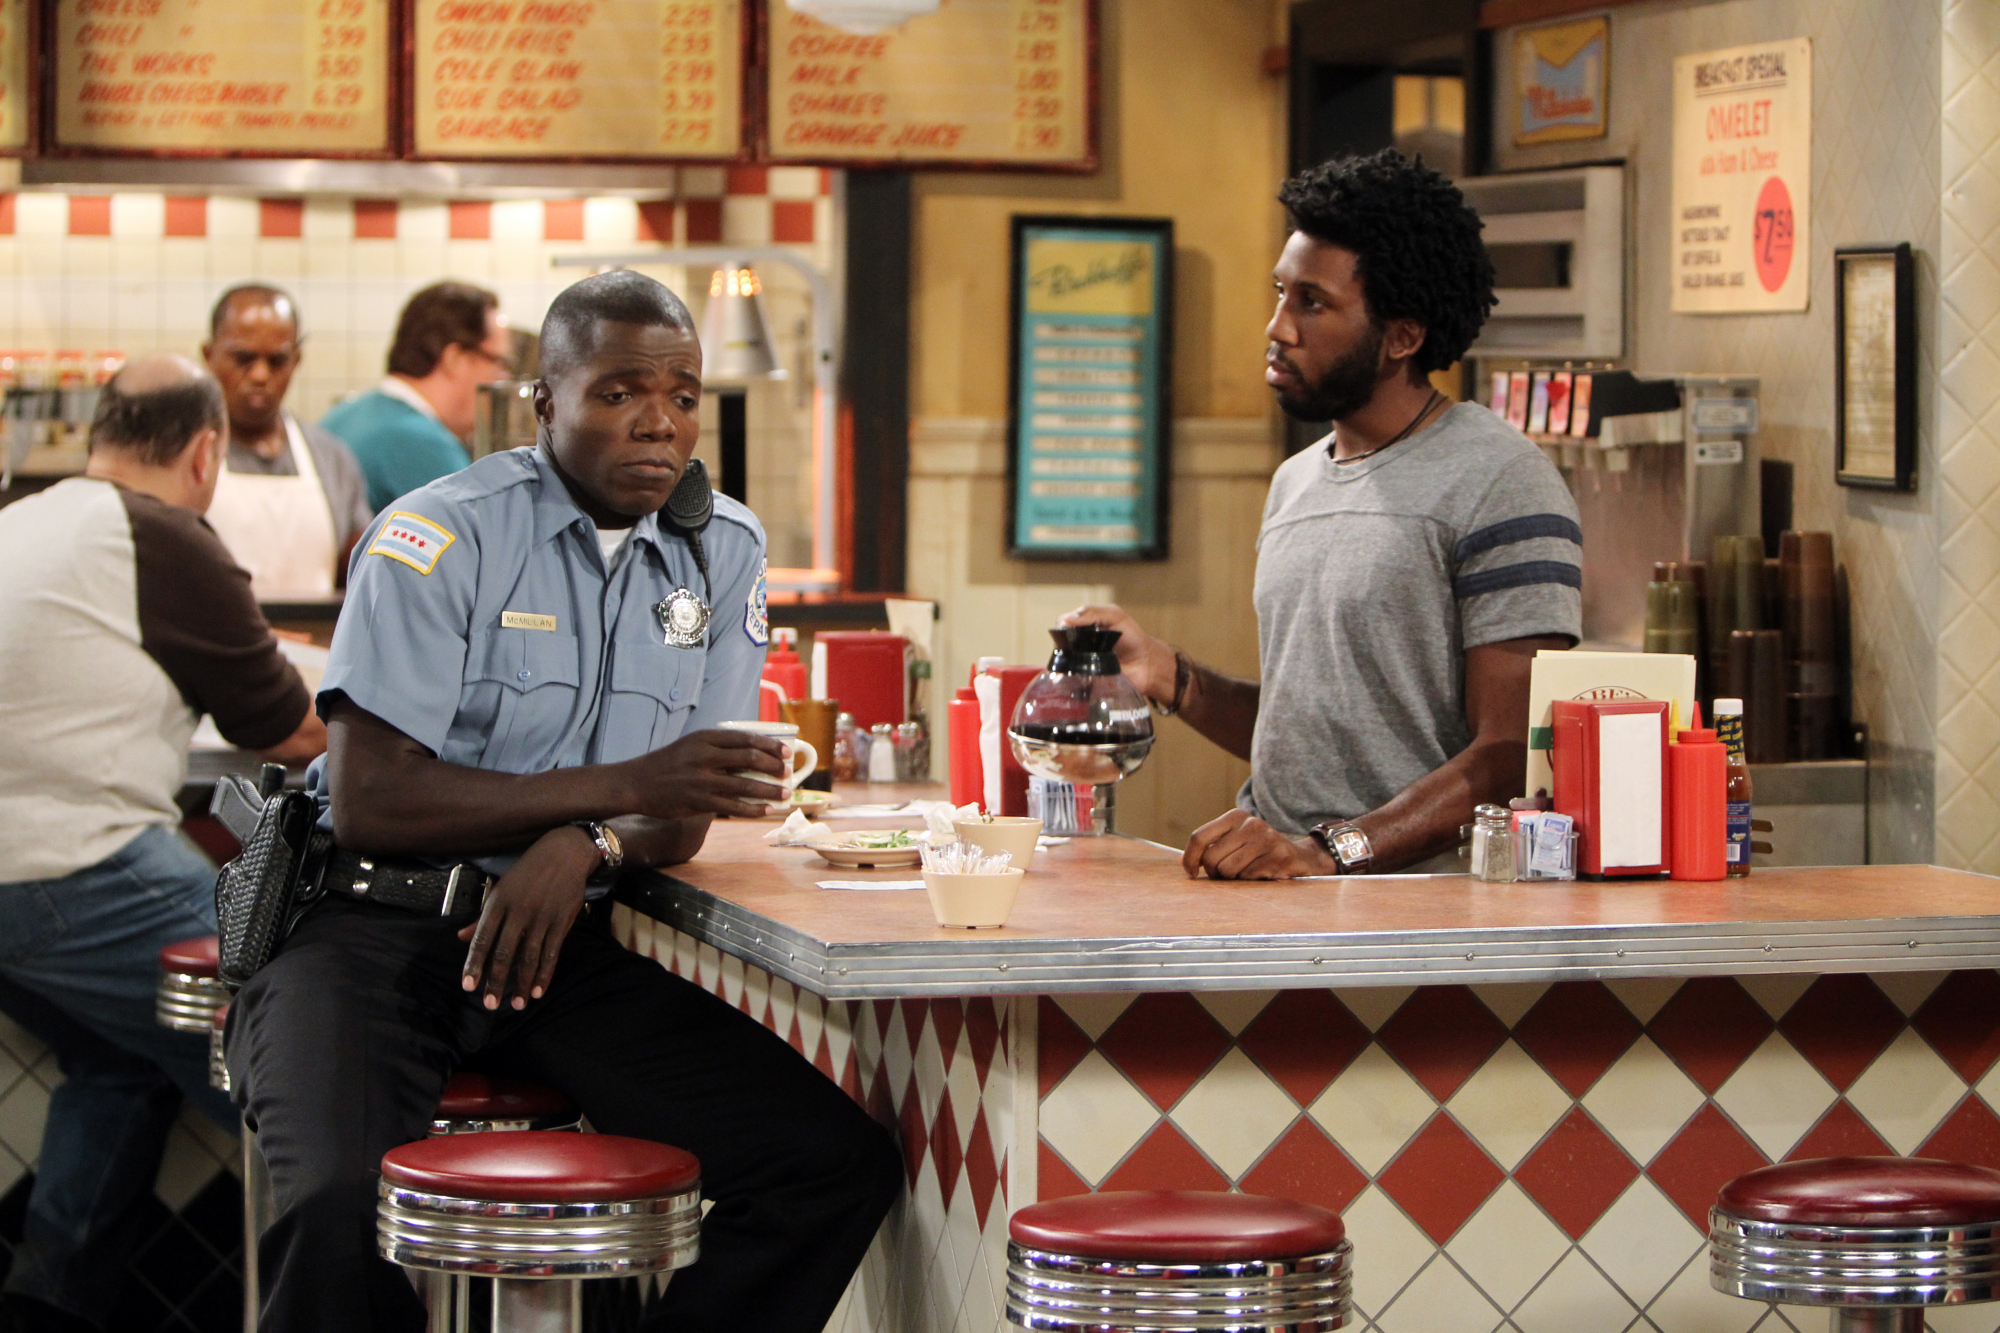 Still of Reno Wilson and Nyambi Nyambi in Mike & Molly: The Honeymoon Is Over (2012)